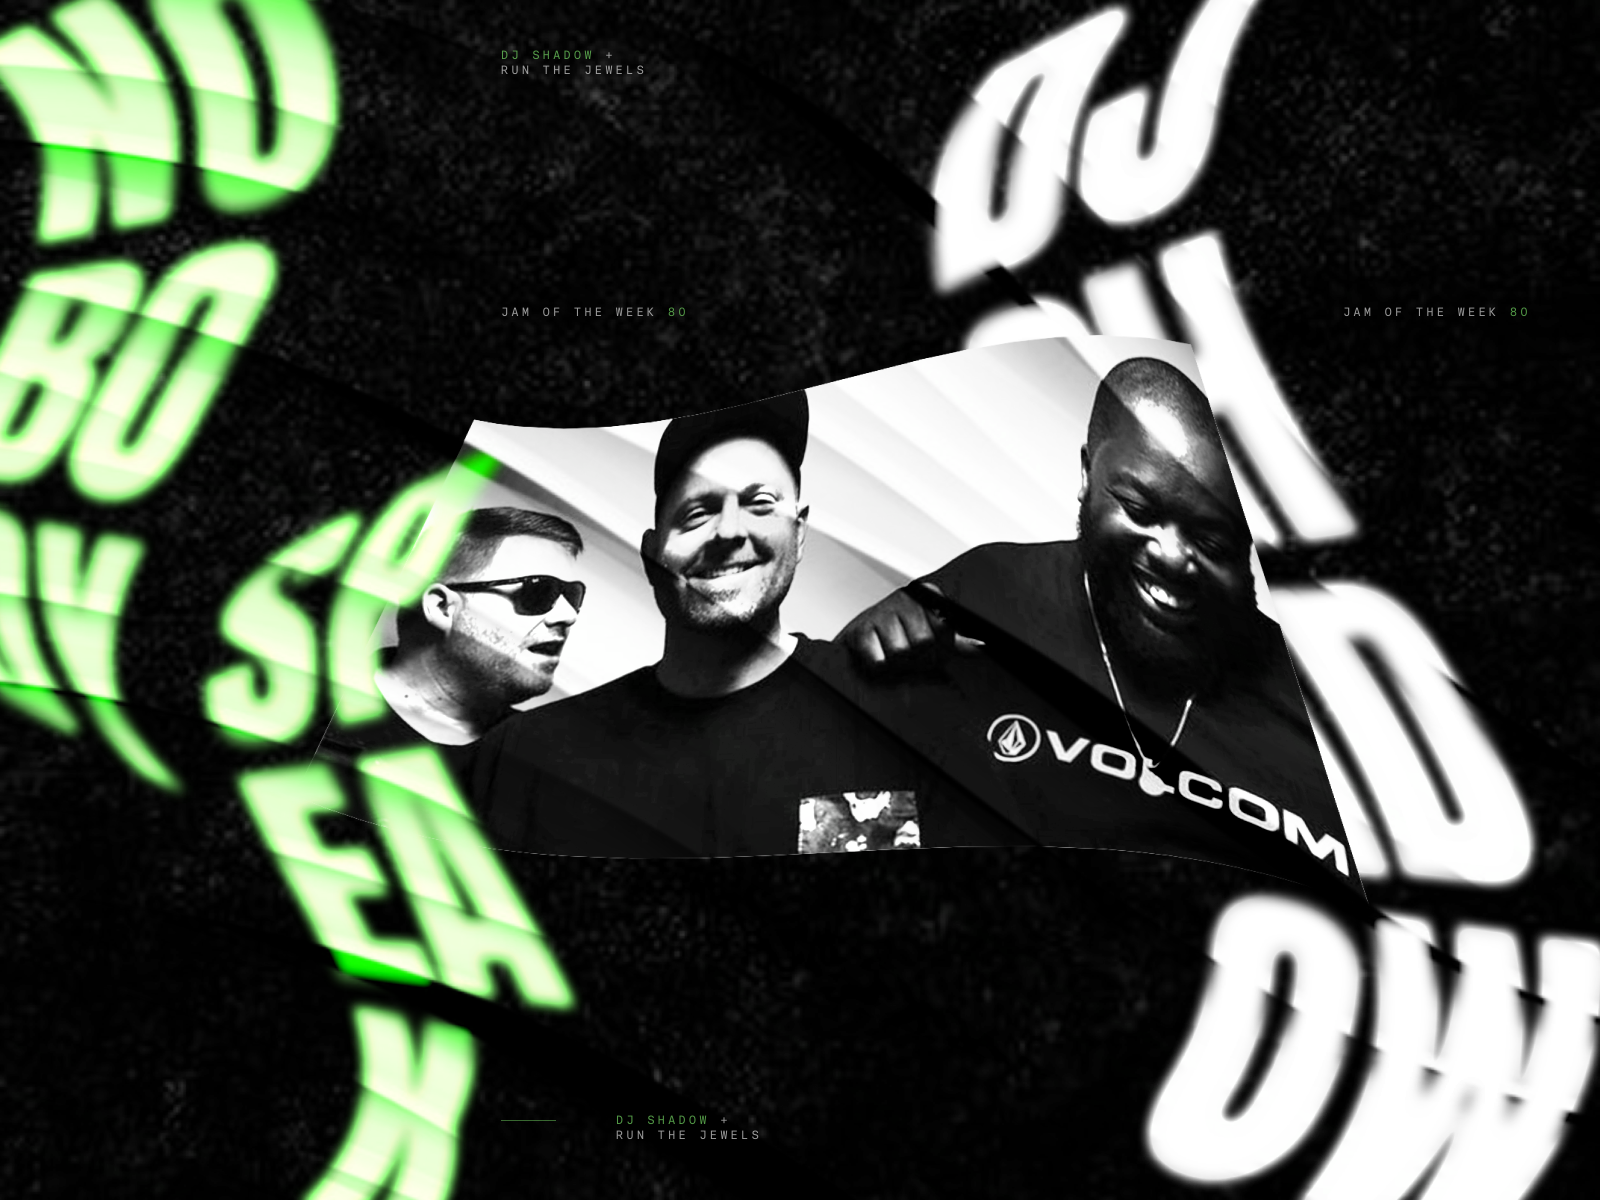 Jam Of The Week - 80 album art album cover album cover art collaboration design dj shadow ghost graphic design hip hop illustration jam of the week music music and design musician passion project rogue studio run the jewels typography warped type weird type